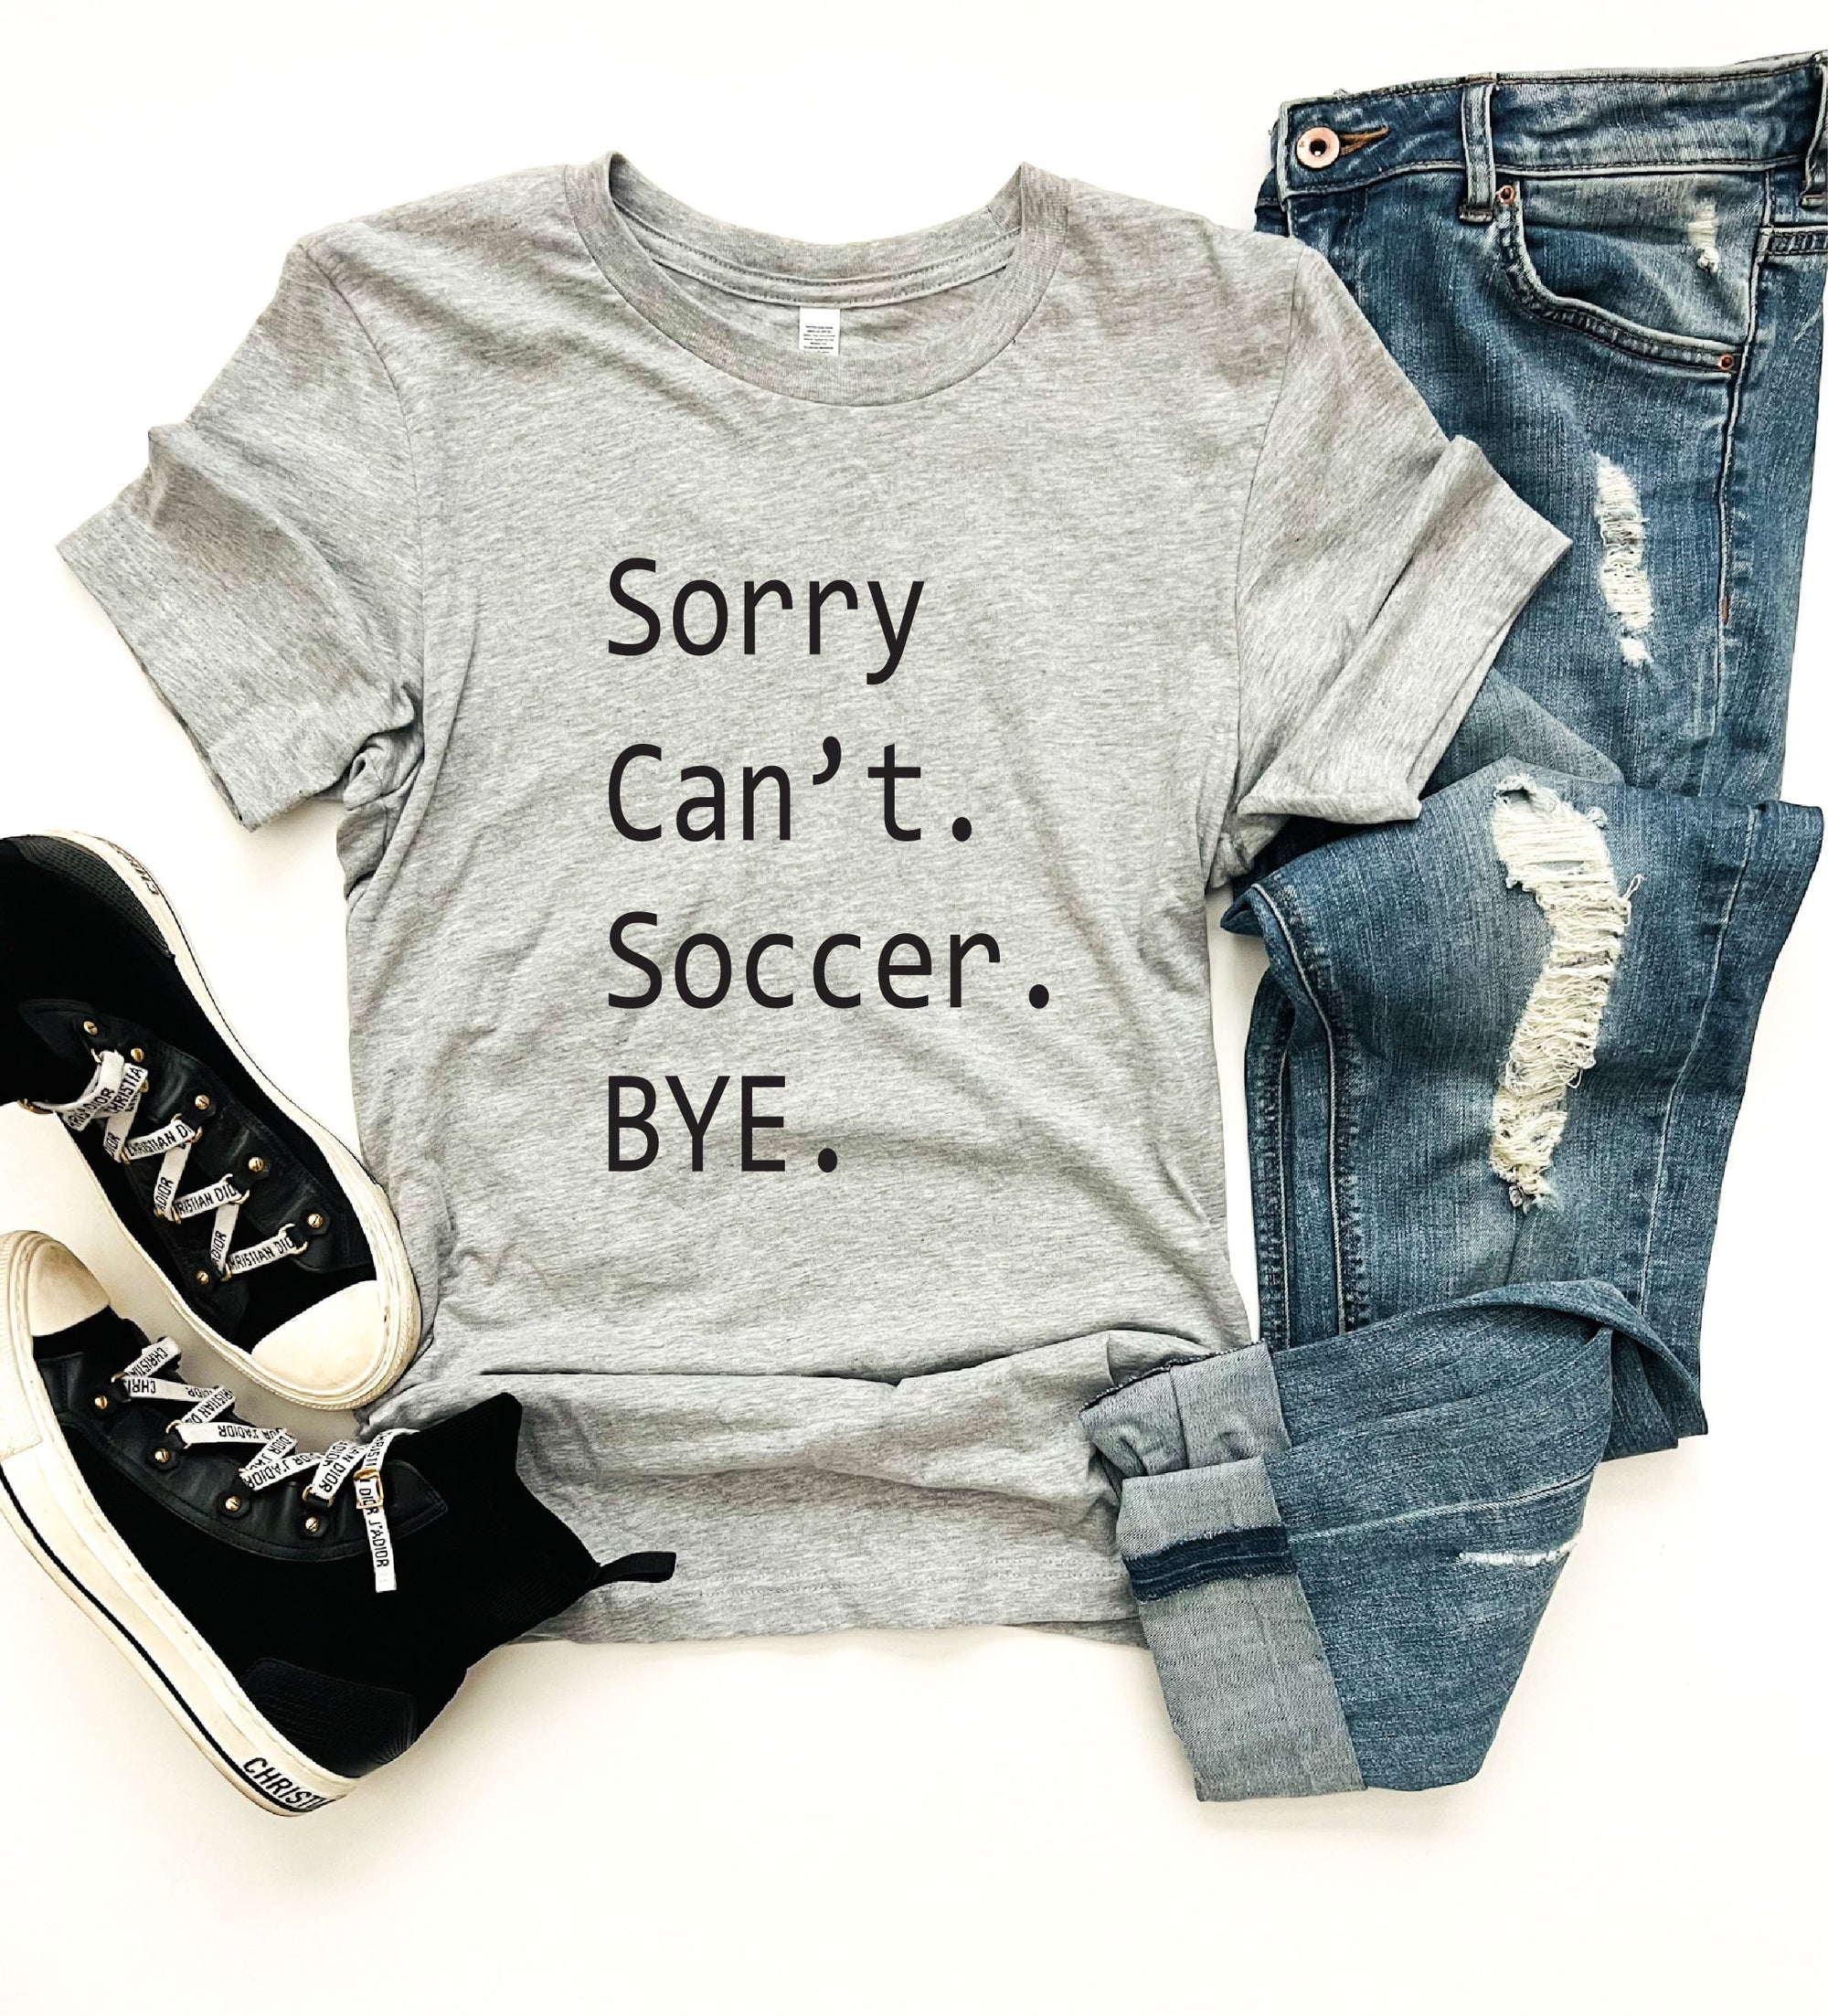 Sorry can't soccer tee Short sleeve sports tee Bella Canvas 3001 athletic Heather 